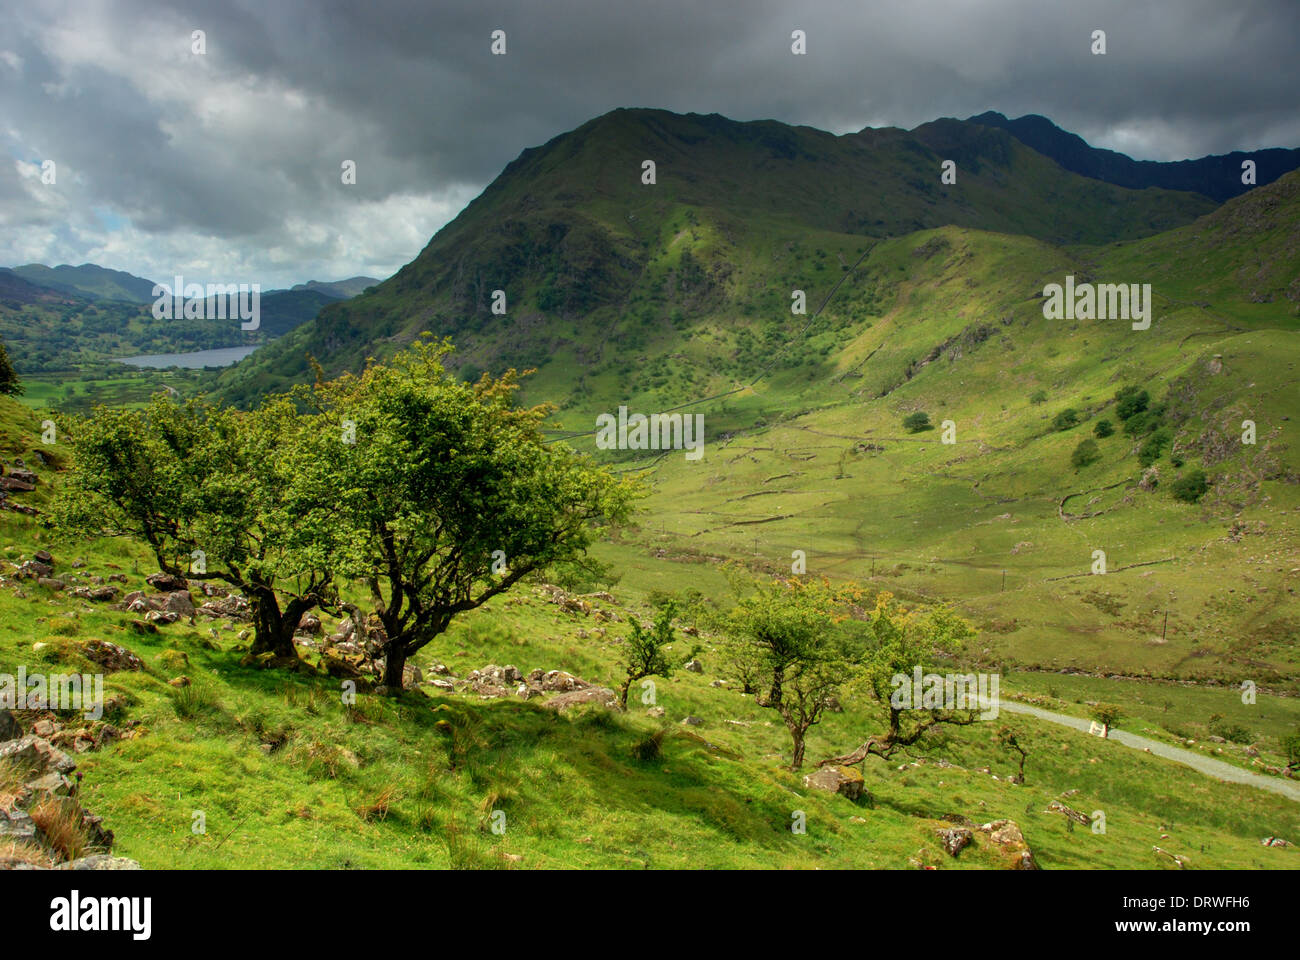 Tree-lined Welsh valley in the Snowdonia National Park, Wales Stock Photo